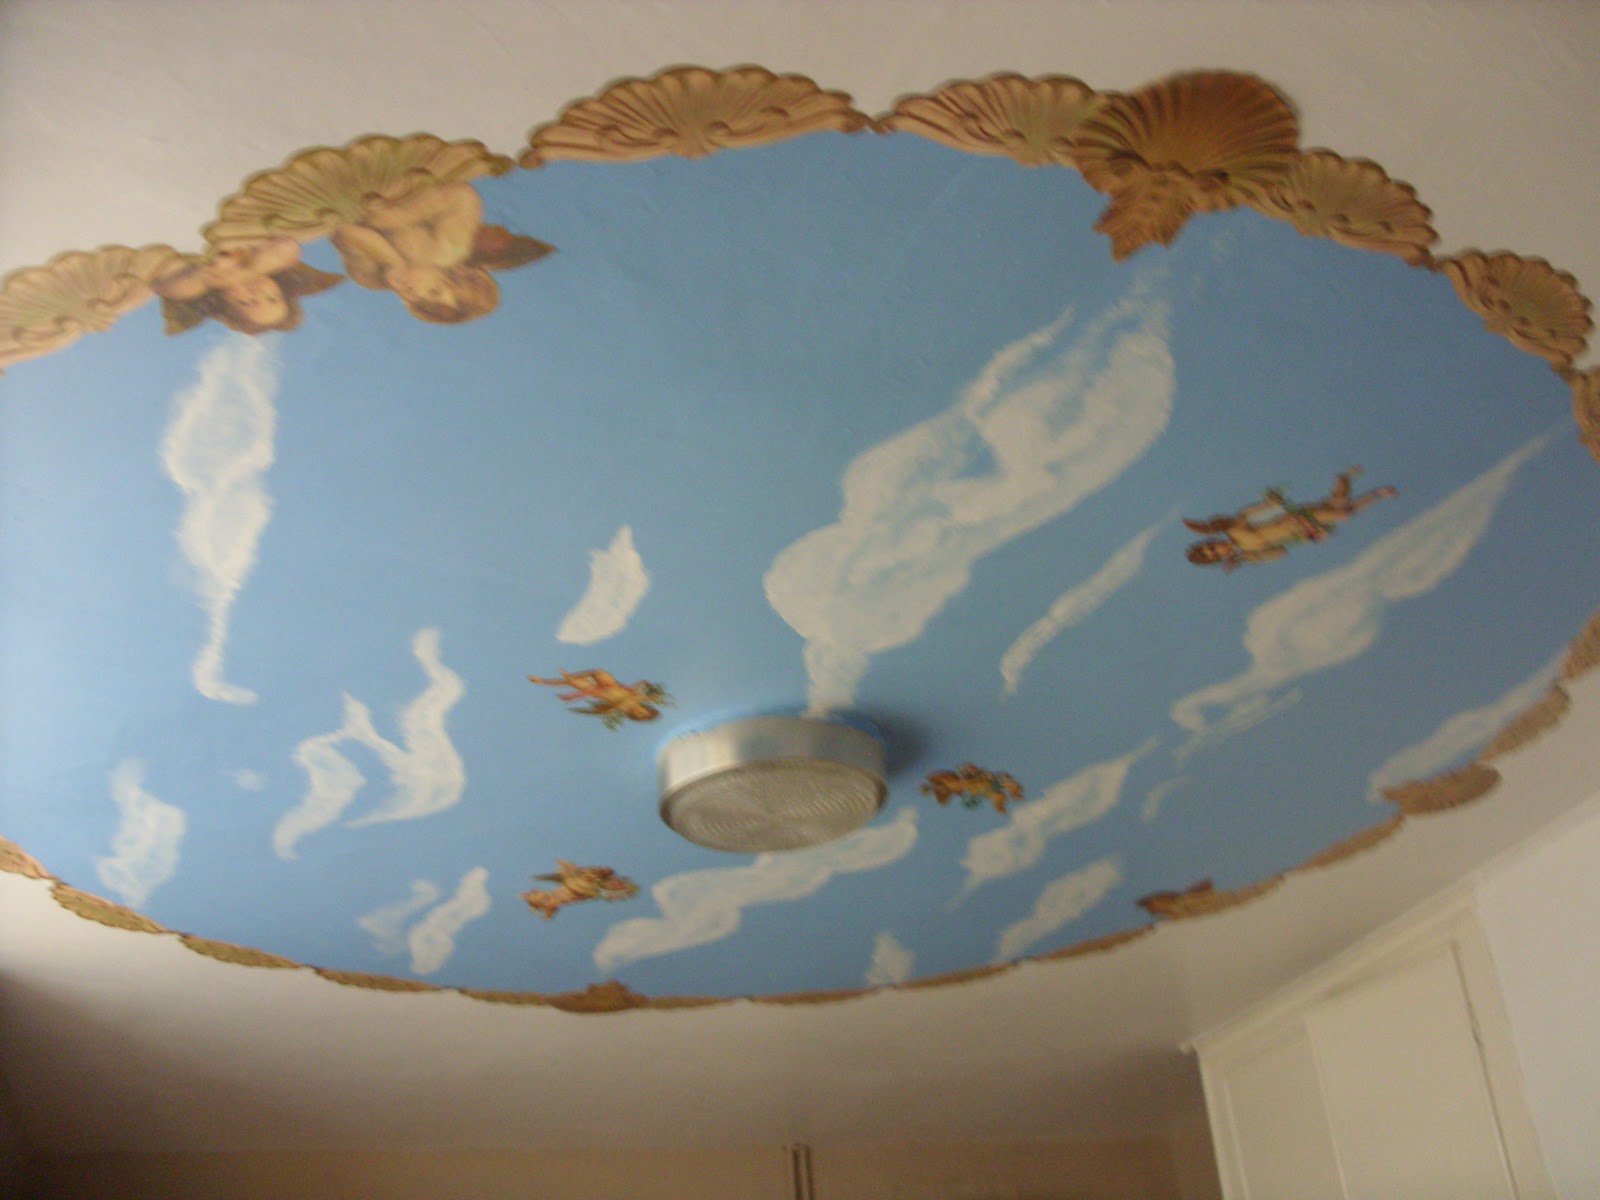  England PAINTED AND DECOUPAGE SKY CEILING WITH CLOUDS AND FAIRIES 1600x1200